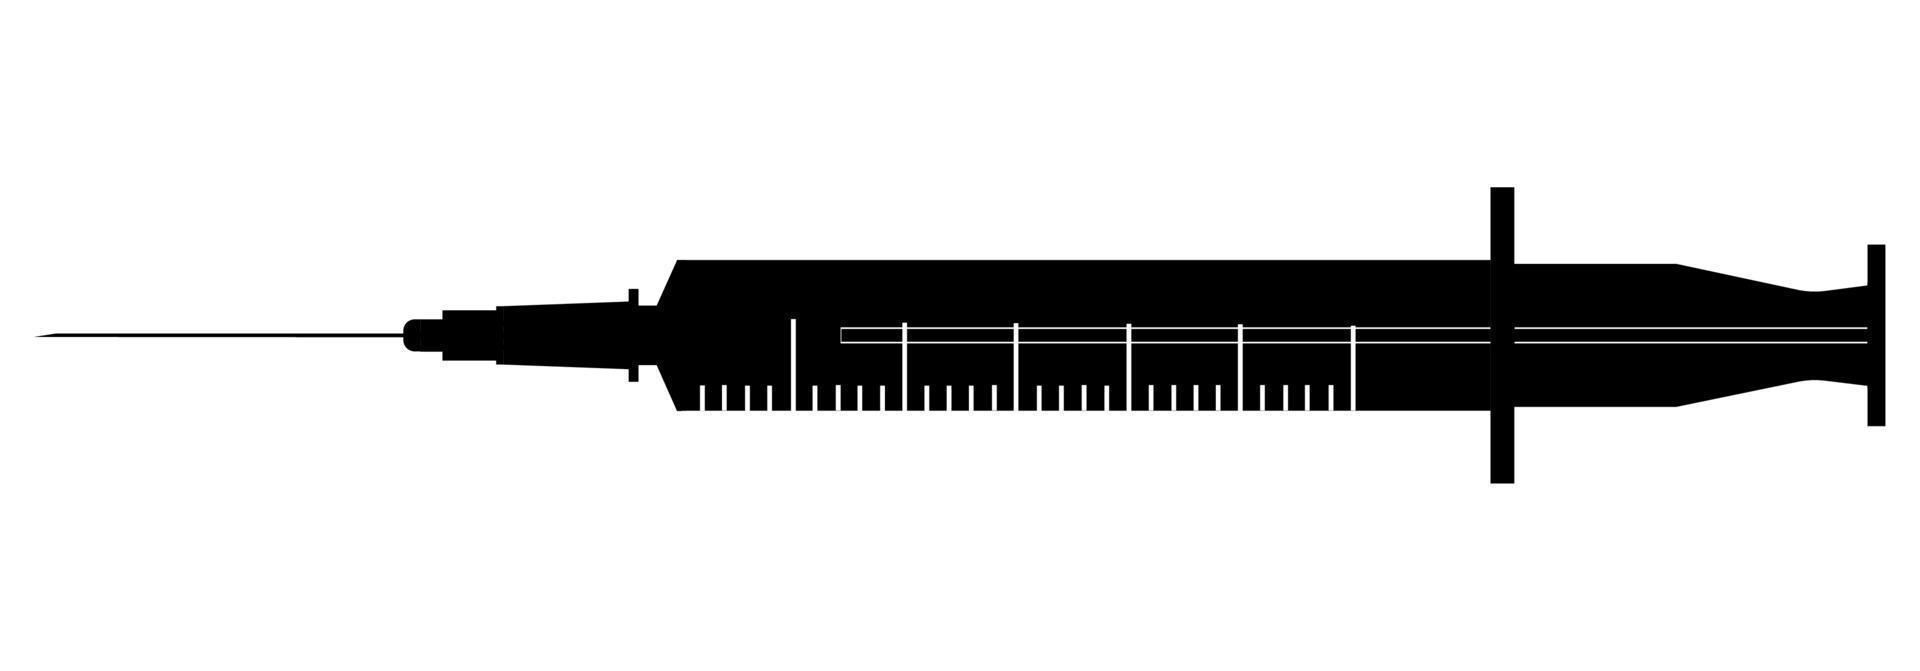 Medical syringe, vector silhouette. Vector of a black syringe icon on a white background.